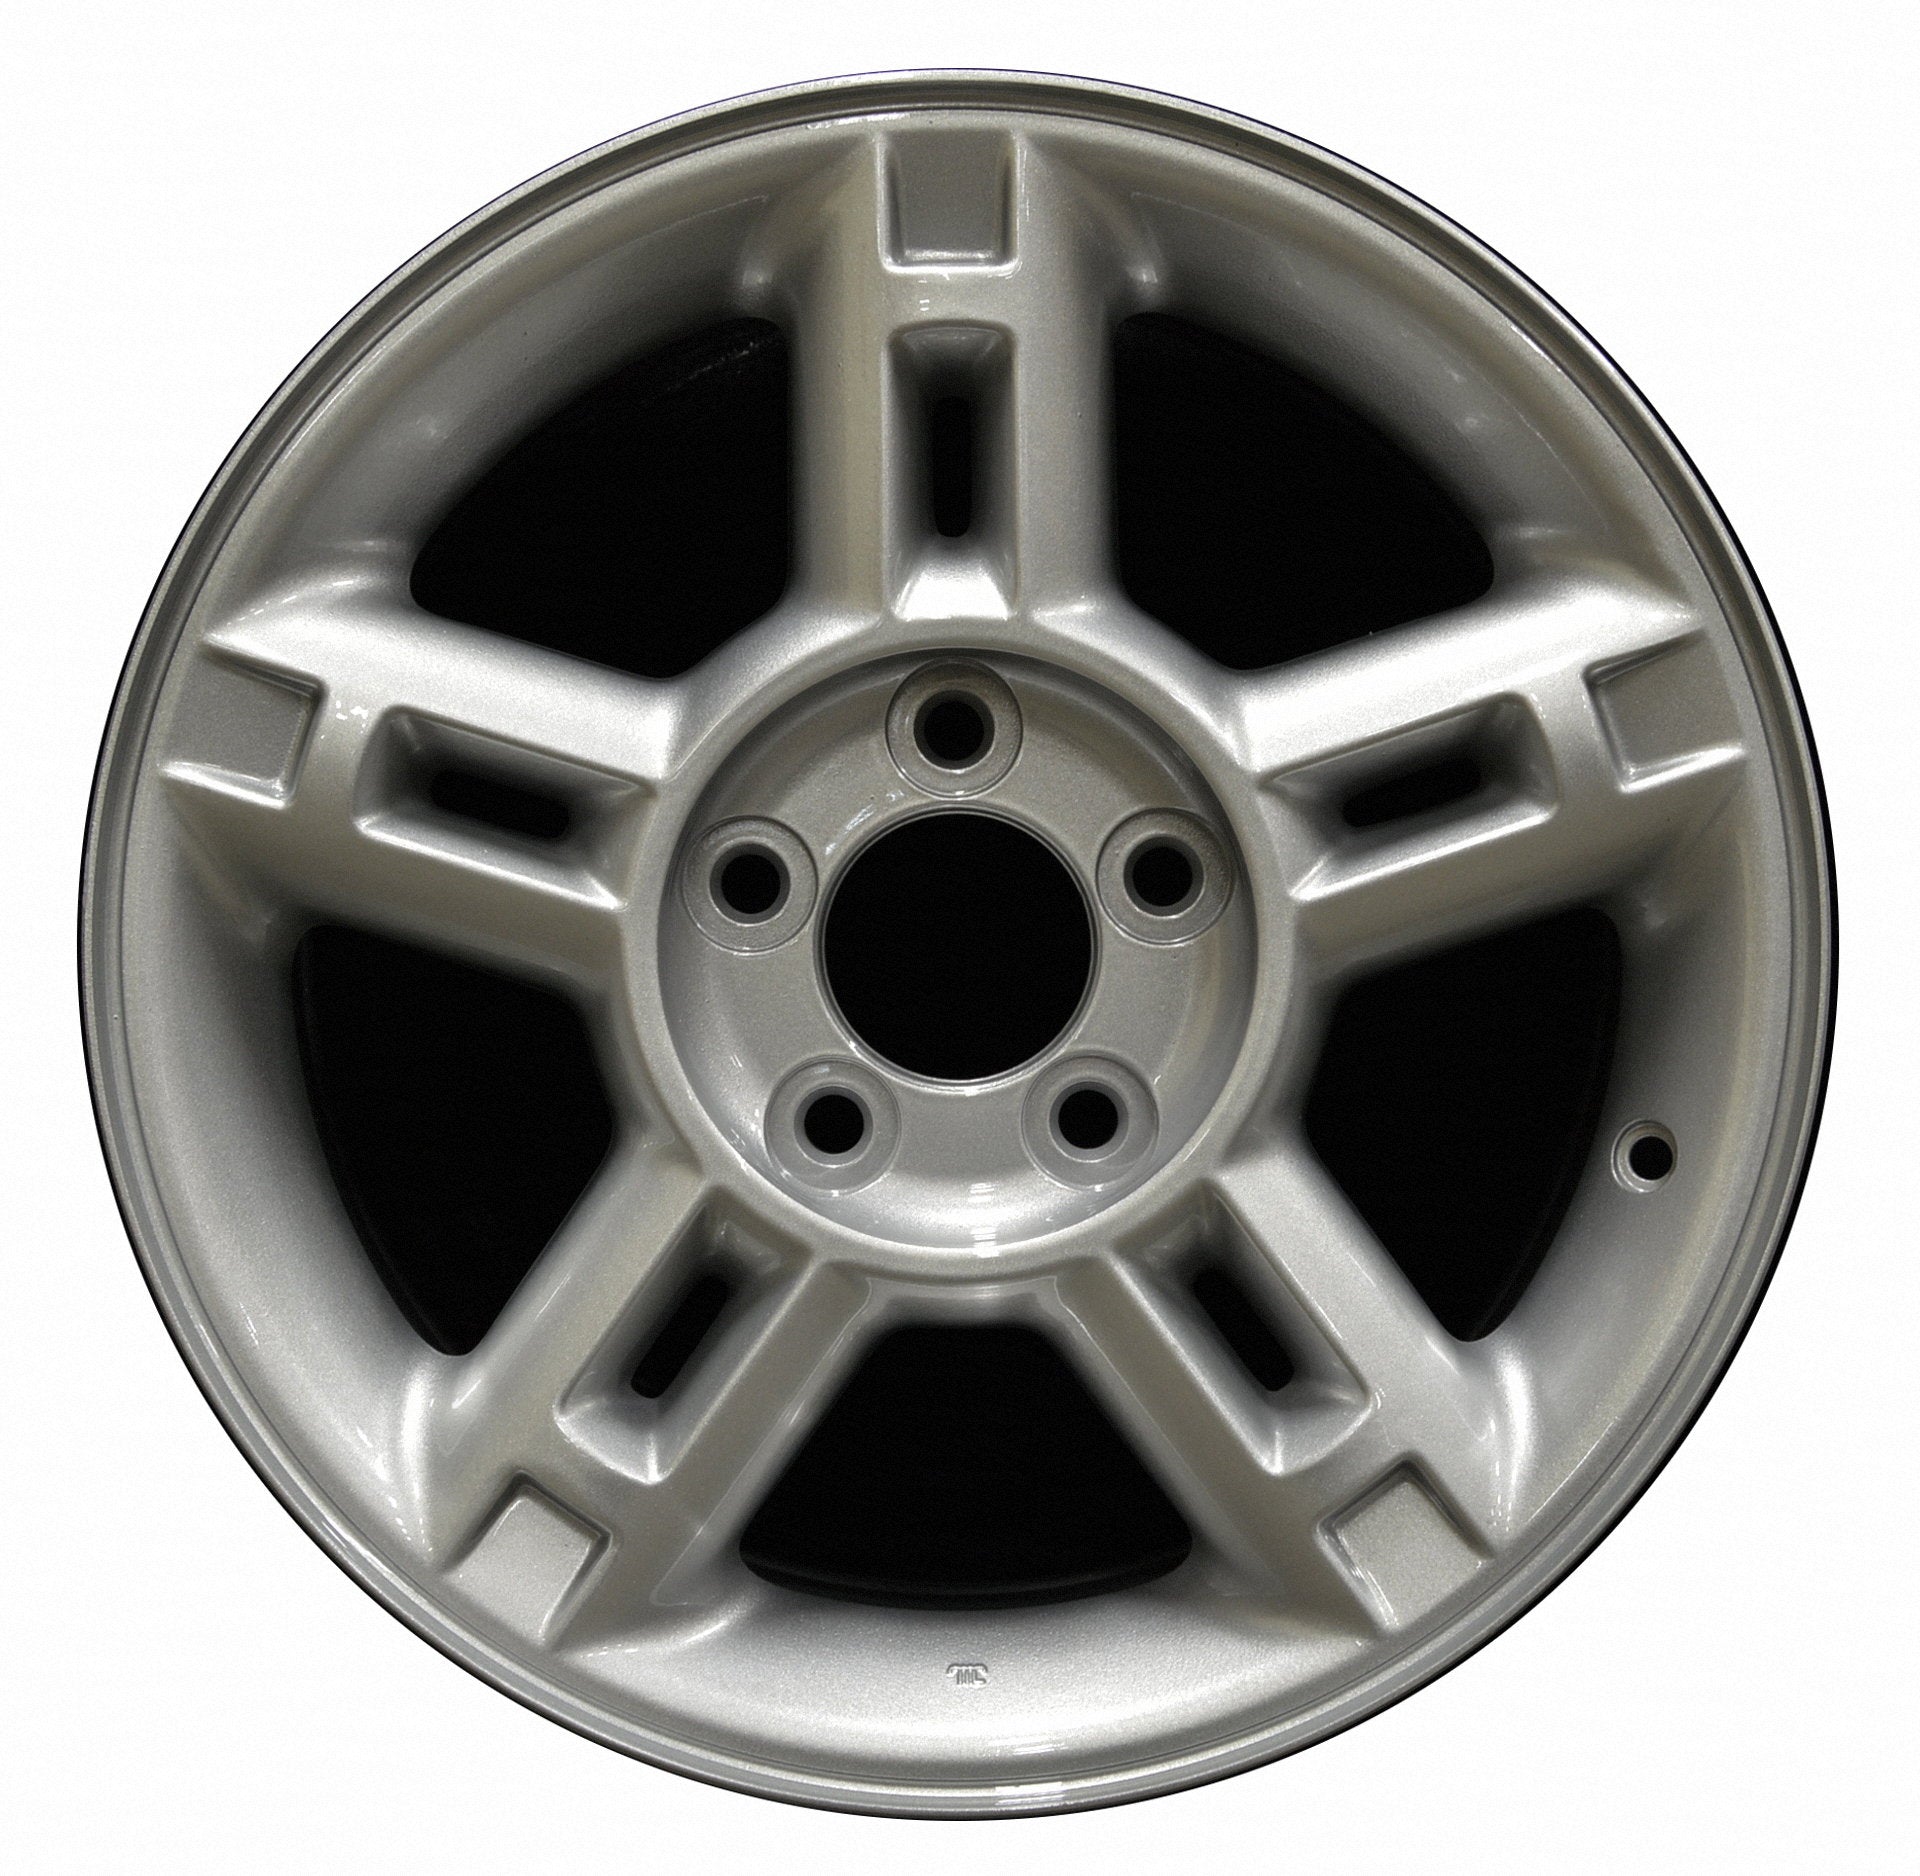 Ford Explorer  2002, 2003, 2004, 2005 Factory OEM Car Wheel Size 16x7 Alloy WAO.3450.PS02.FF